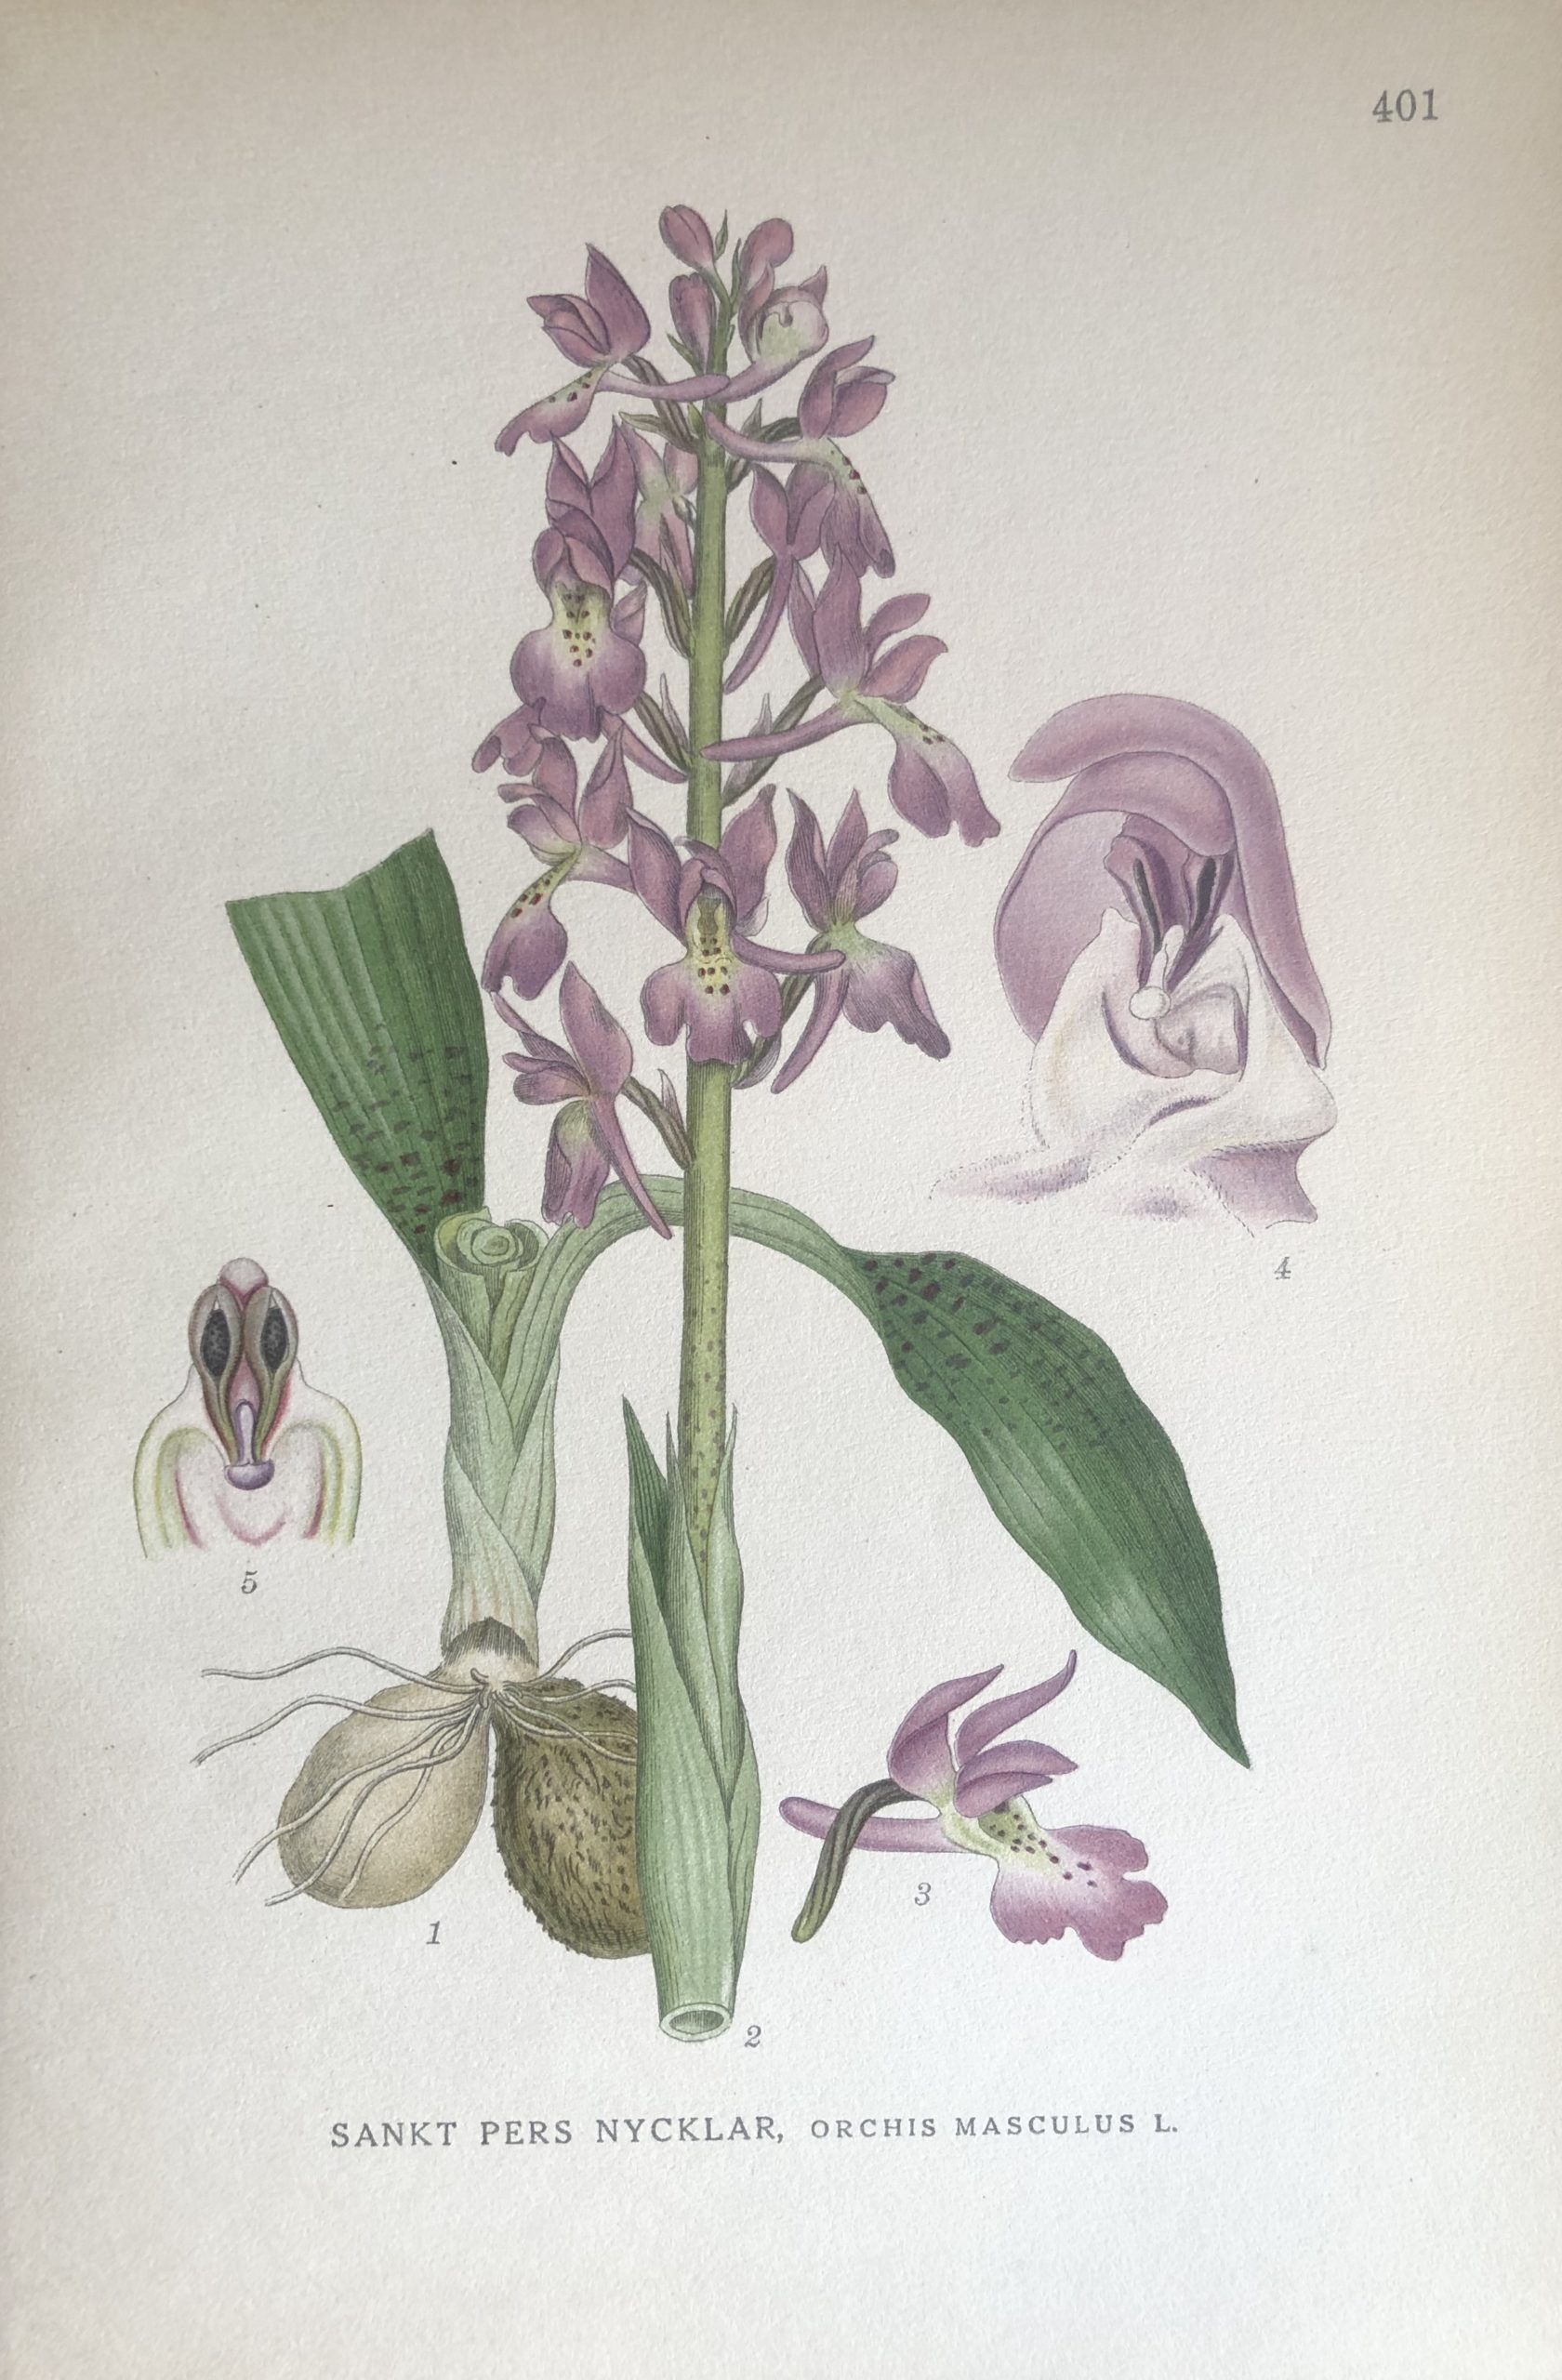 Early purple orchid, SANKT PERS NYCKLAR, Orchis mascula Nordens Flora 1922 nr. 401